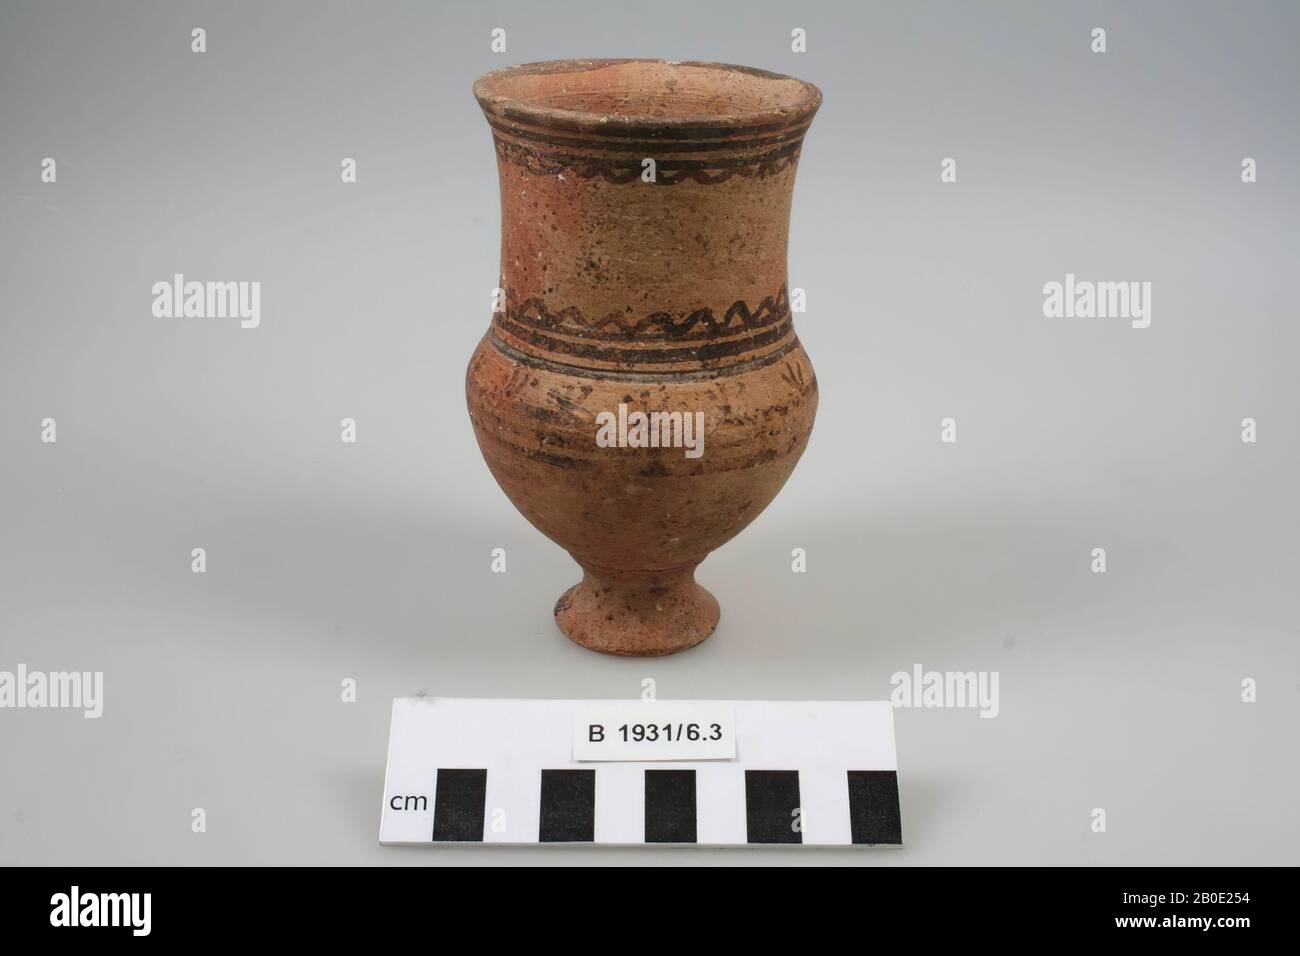 A chalice with a slight outward edge. It is decorated with horizontal lines, wave patterns and stylized plants. Probably this object dates from the transition period between Giyan II and I., crockery, pottery, H 12.9 cm, D 8 cm, D neck 7.5 cm, Bronze Age 1600-1300 BC, Iran Stock Photo